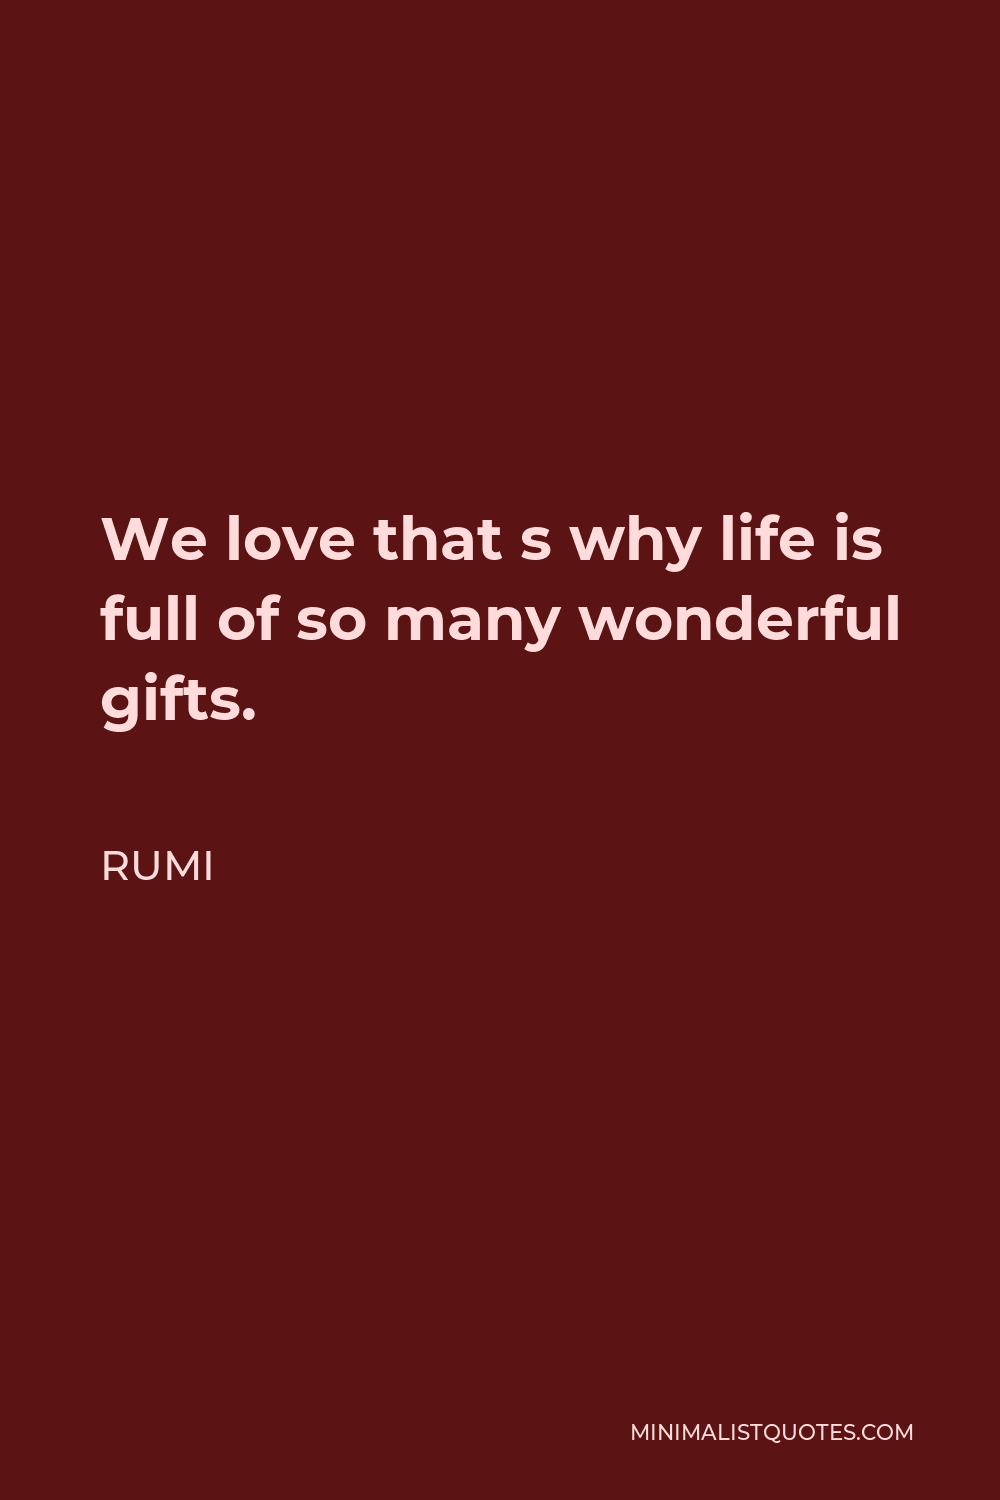 Rumi Quote - We love that s why life is full of so many wonderful gifts.